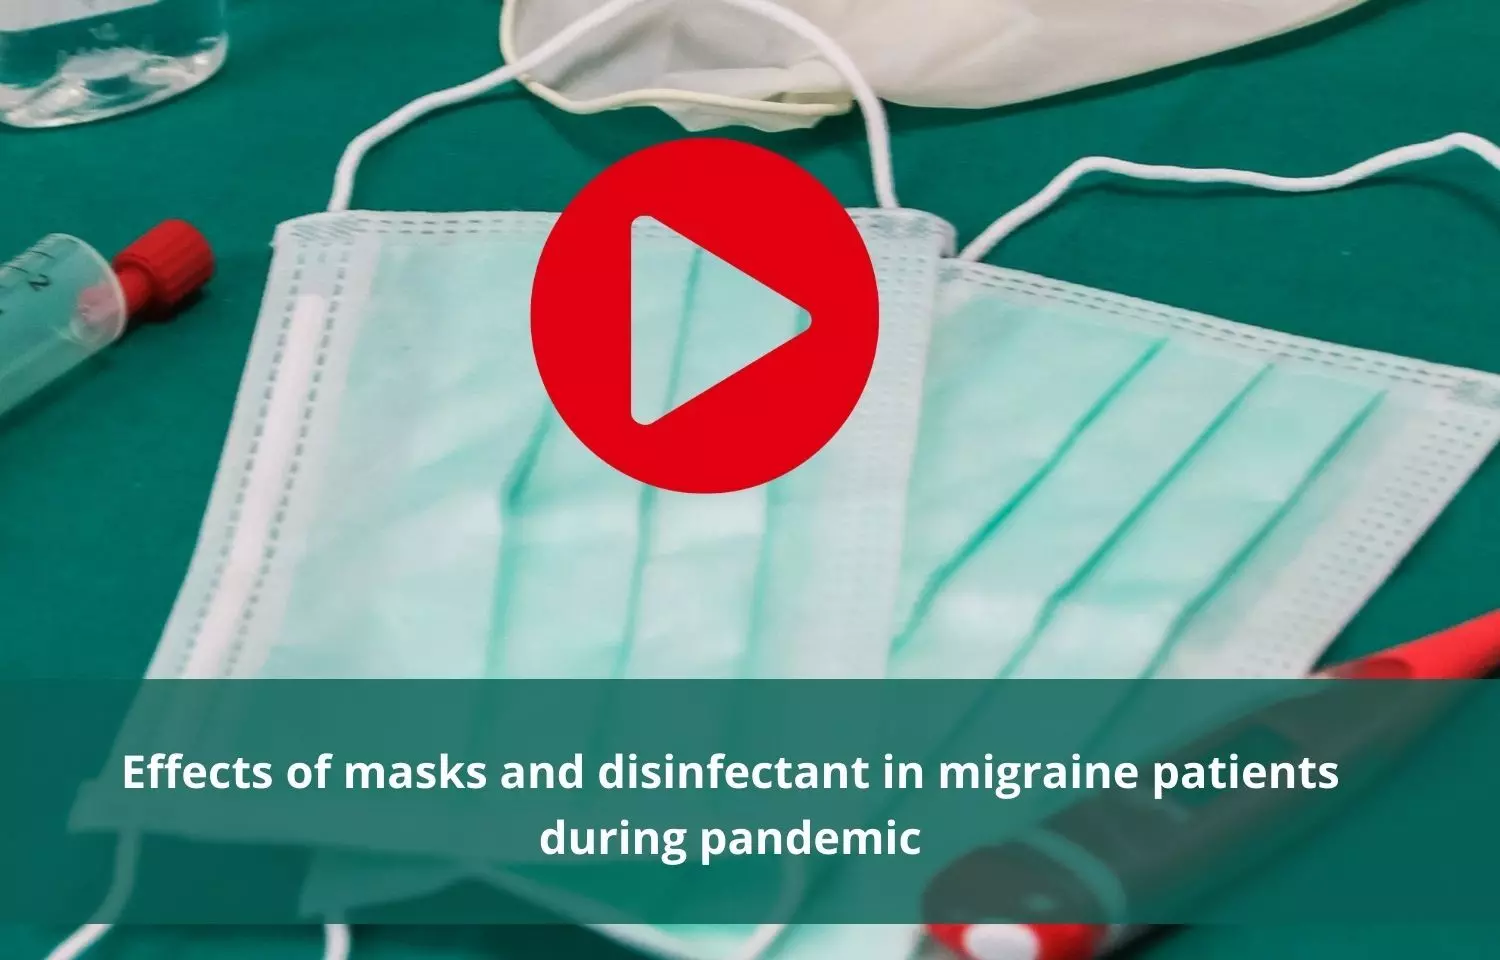 Masks and disinfectant to affect migraine patients during pandemic